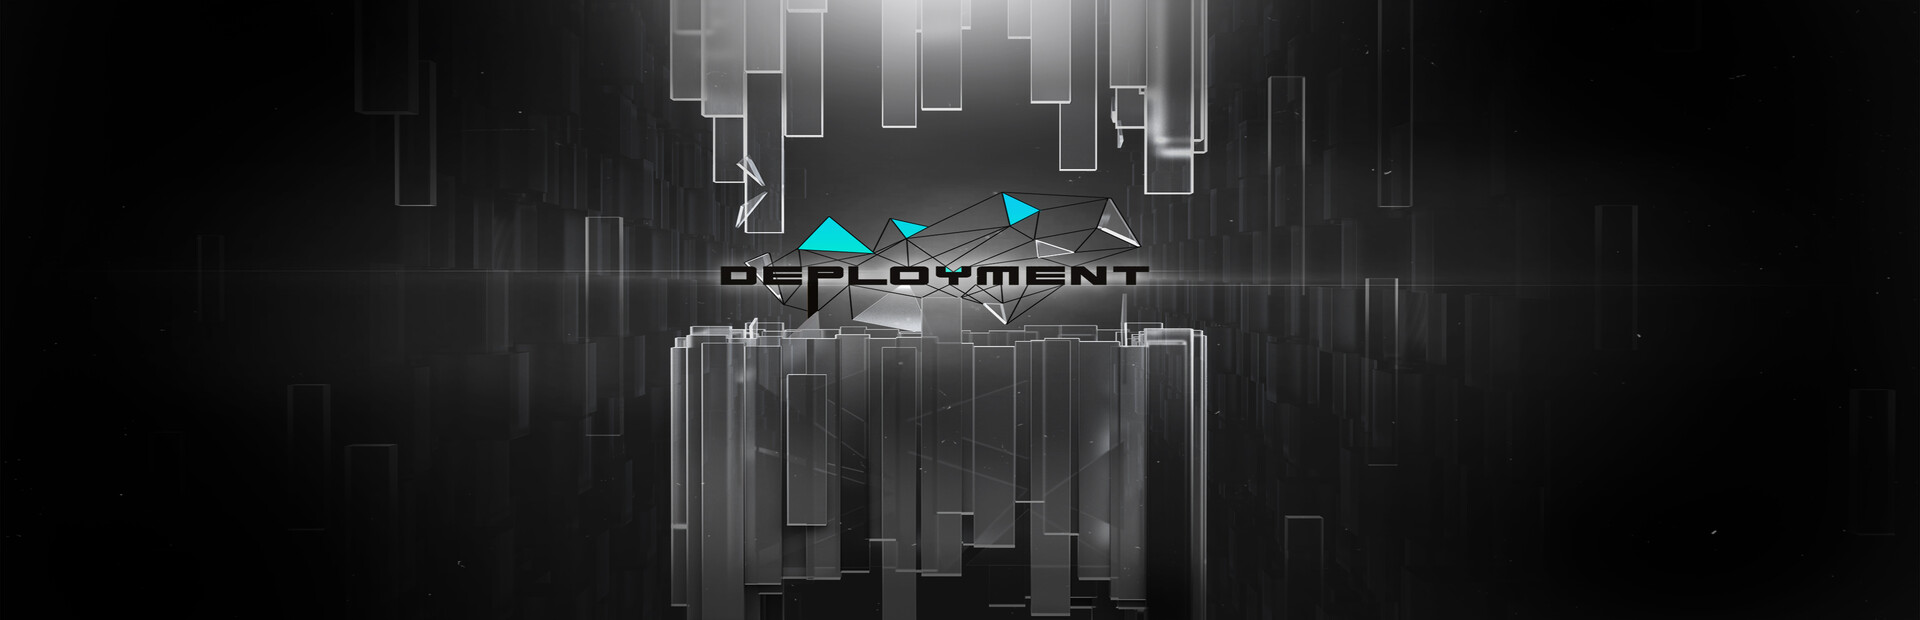 DEPLOYMENT cover image